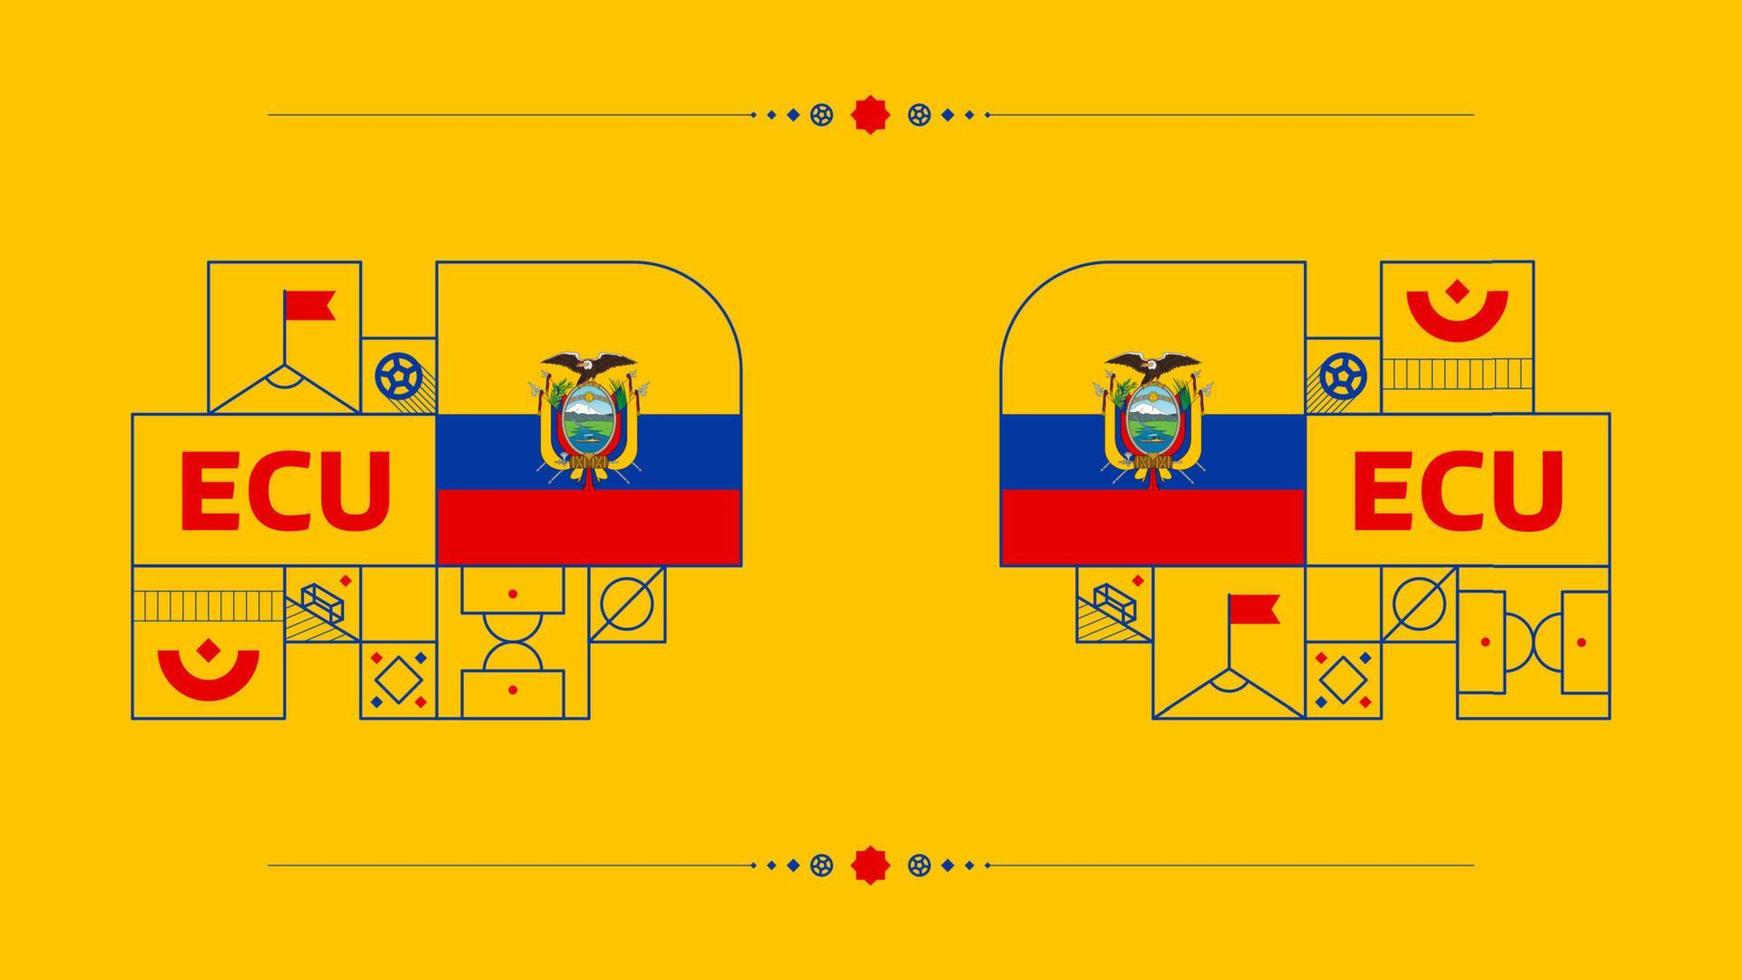 ecuador flag for 2022 football cup tournament. isolated National team flag with geometric elements for 2022 soccer or football Vector illustration